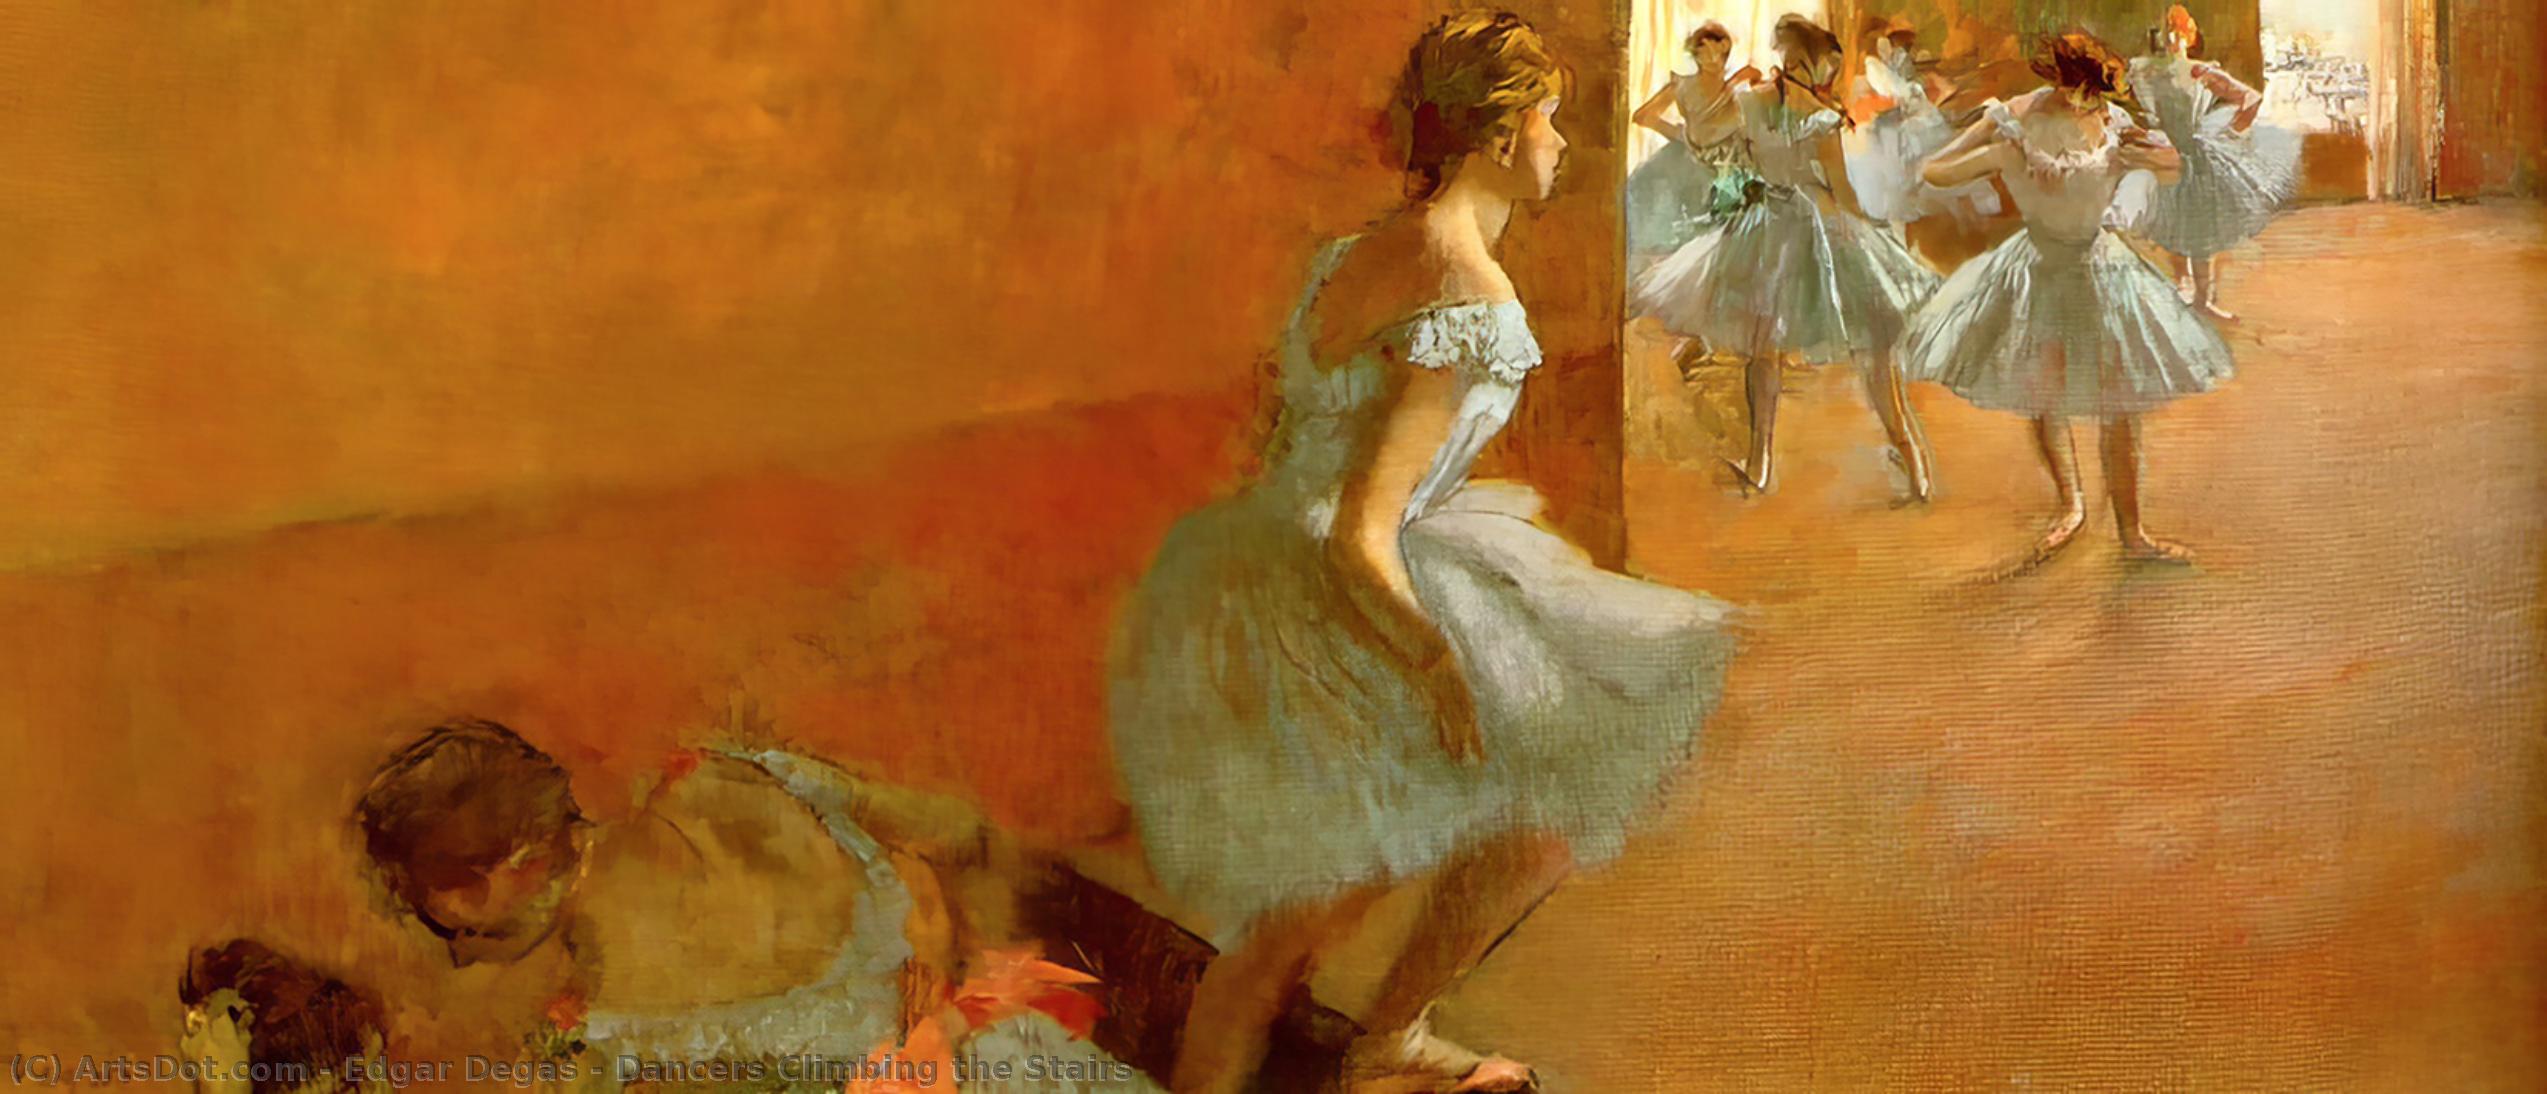 WikiOO.org - Encyclopedia of Fine Arts - Malba, Artwork Edgar Degas - Dancers Climbing the Stairs, approx. oil on c